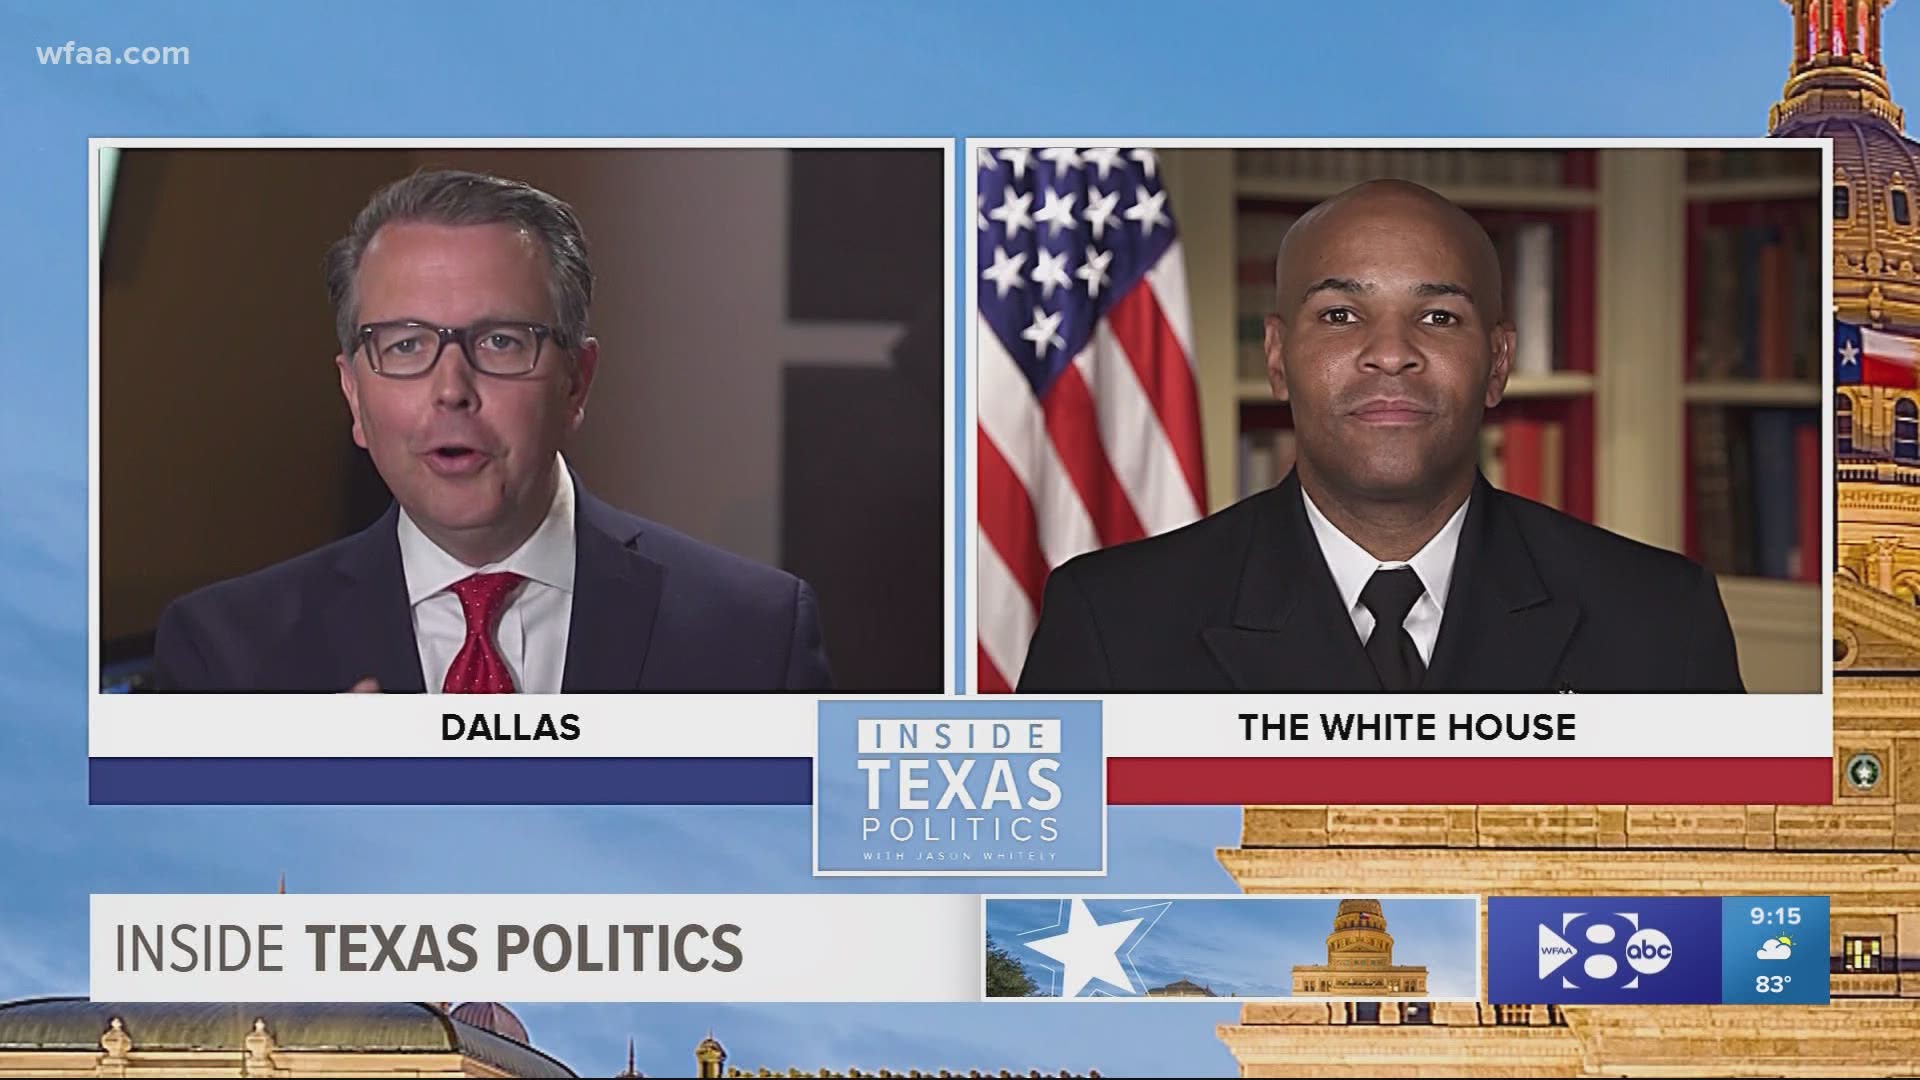 U.S. Surgeon General Jerome Adams said the sooner everyone wears a mask, the sooner we can get closer to normal. *Taped prior to Gov. Greg Abbott's mask order.